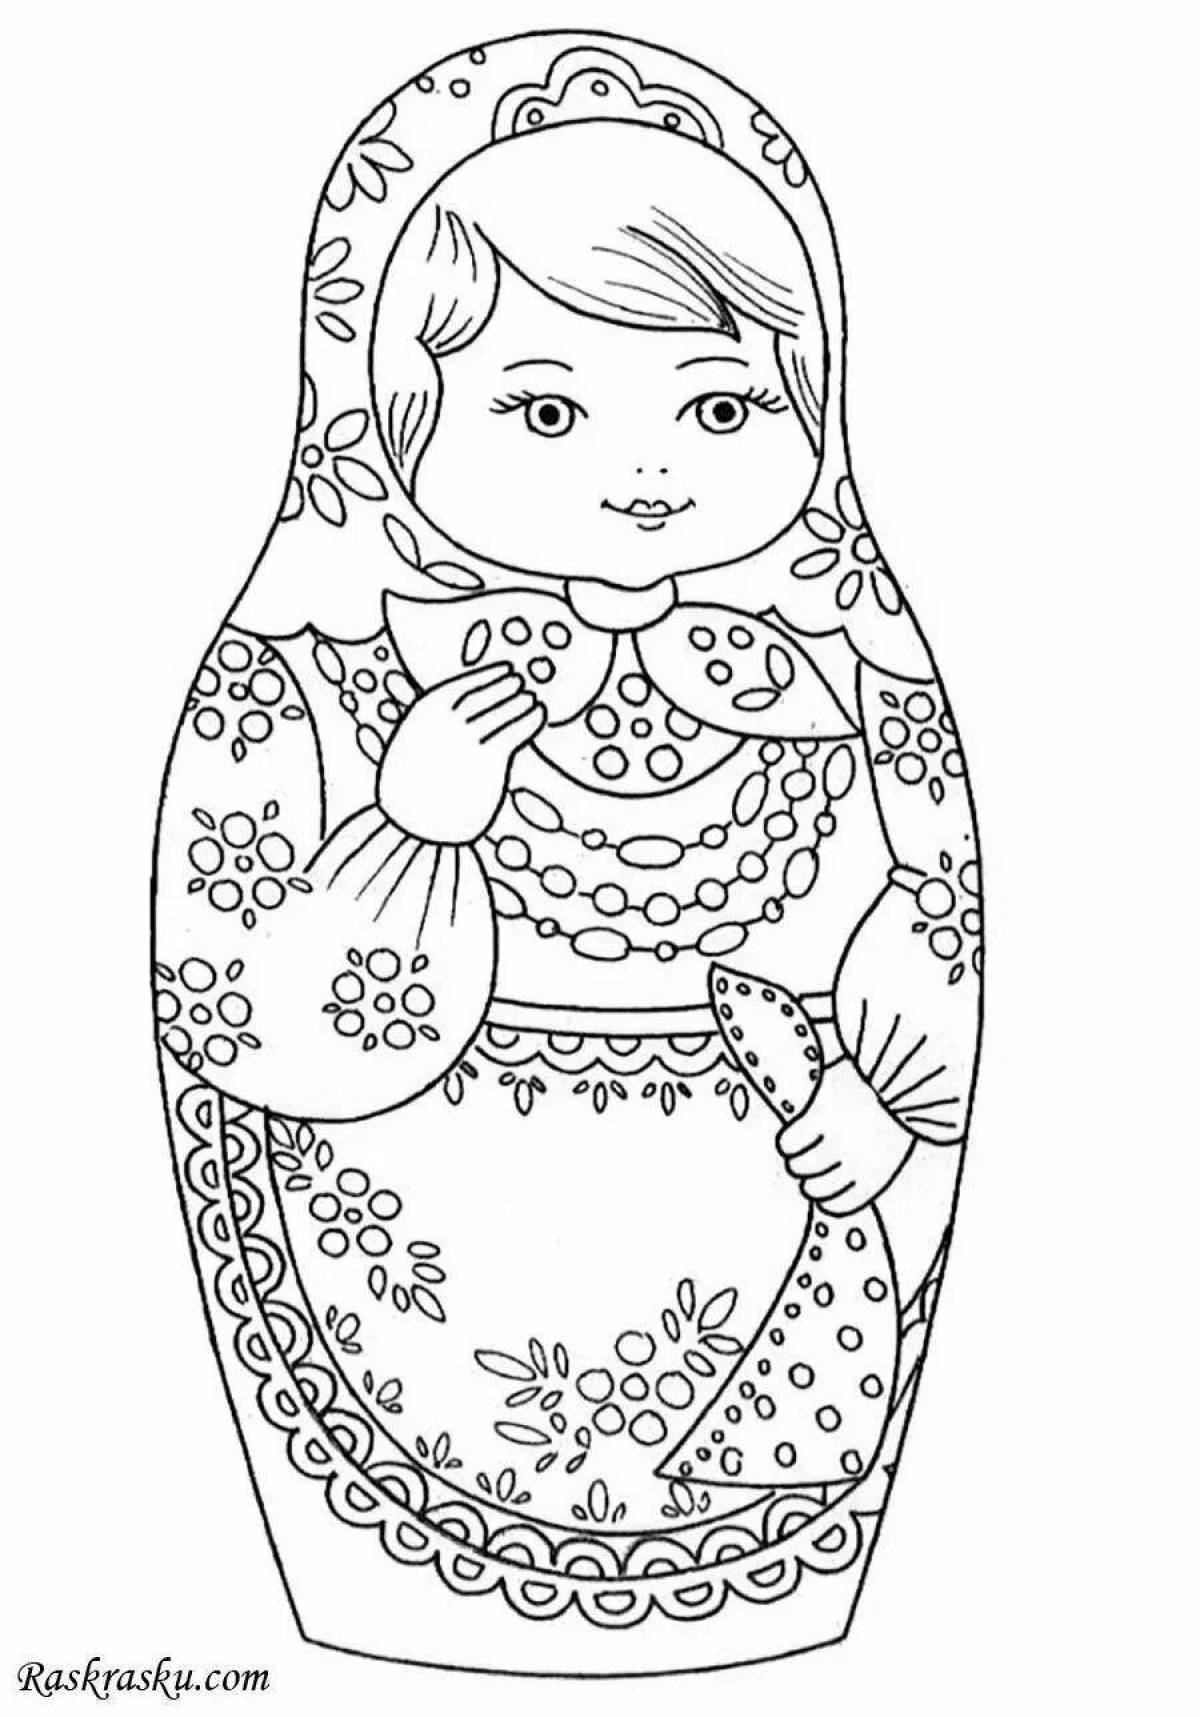 Creative Russian doll coloring book